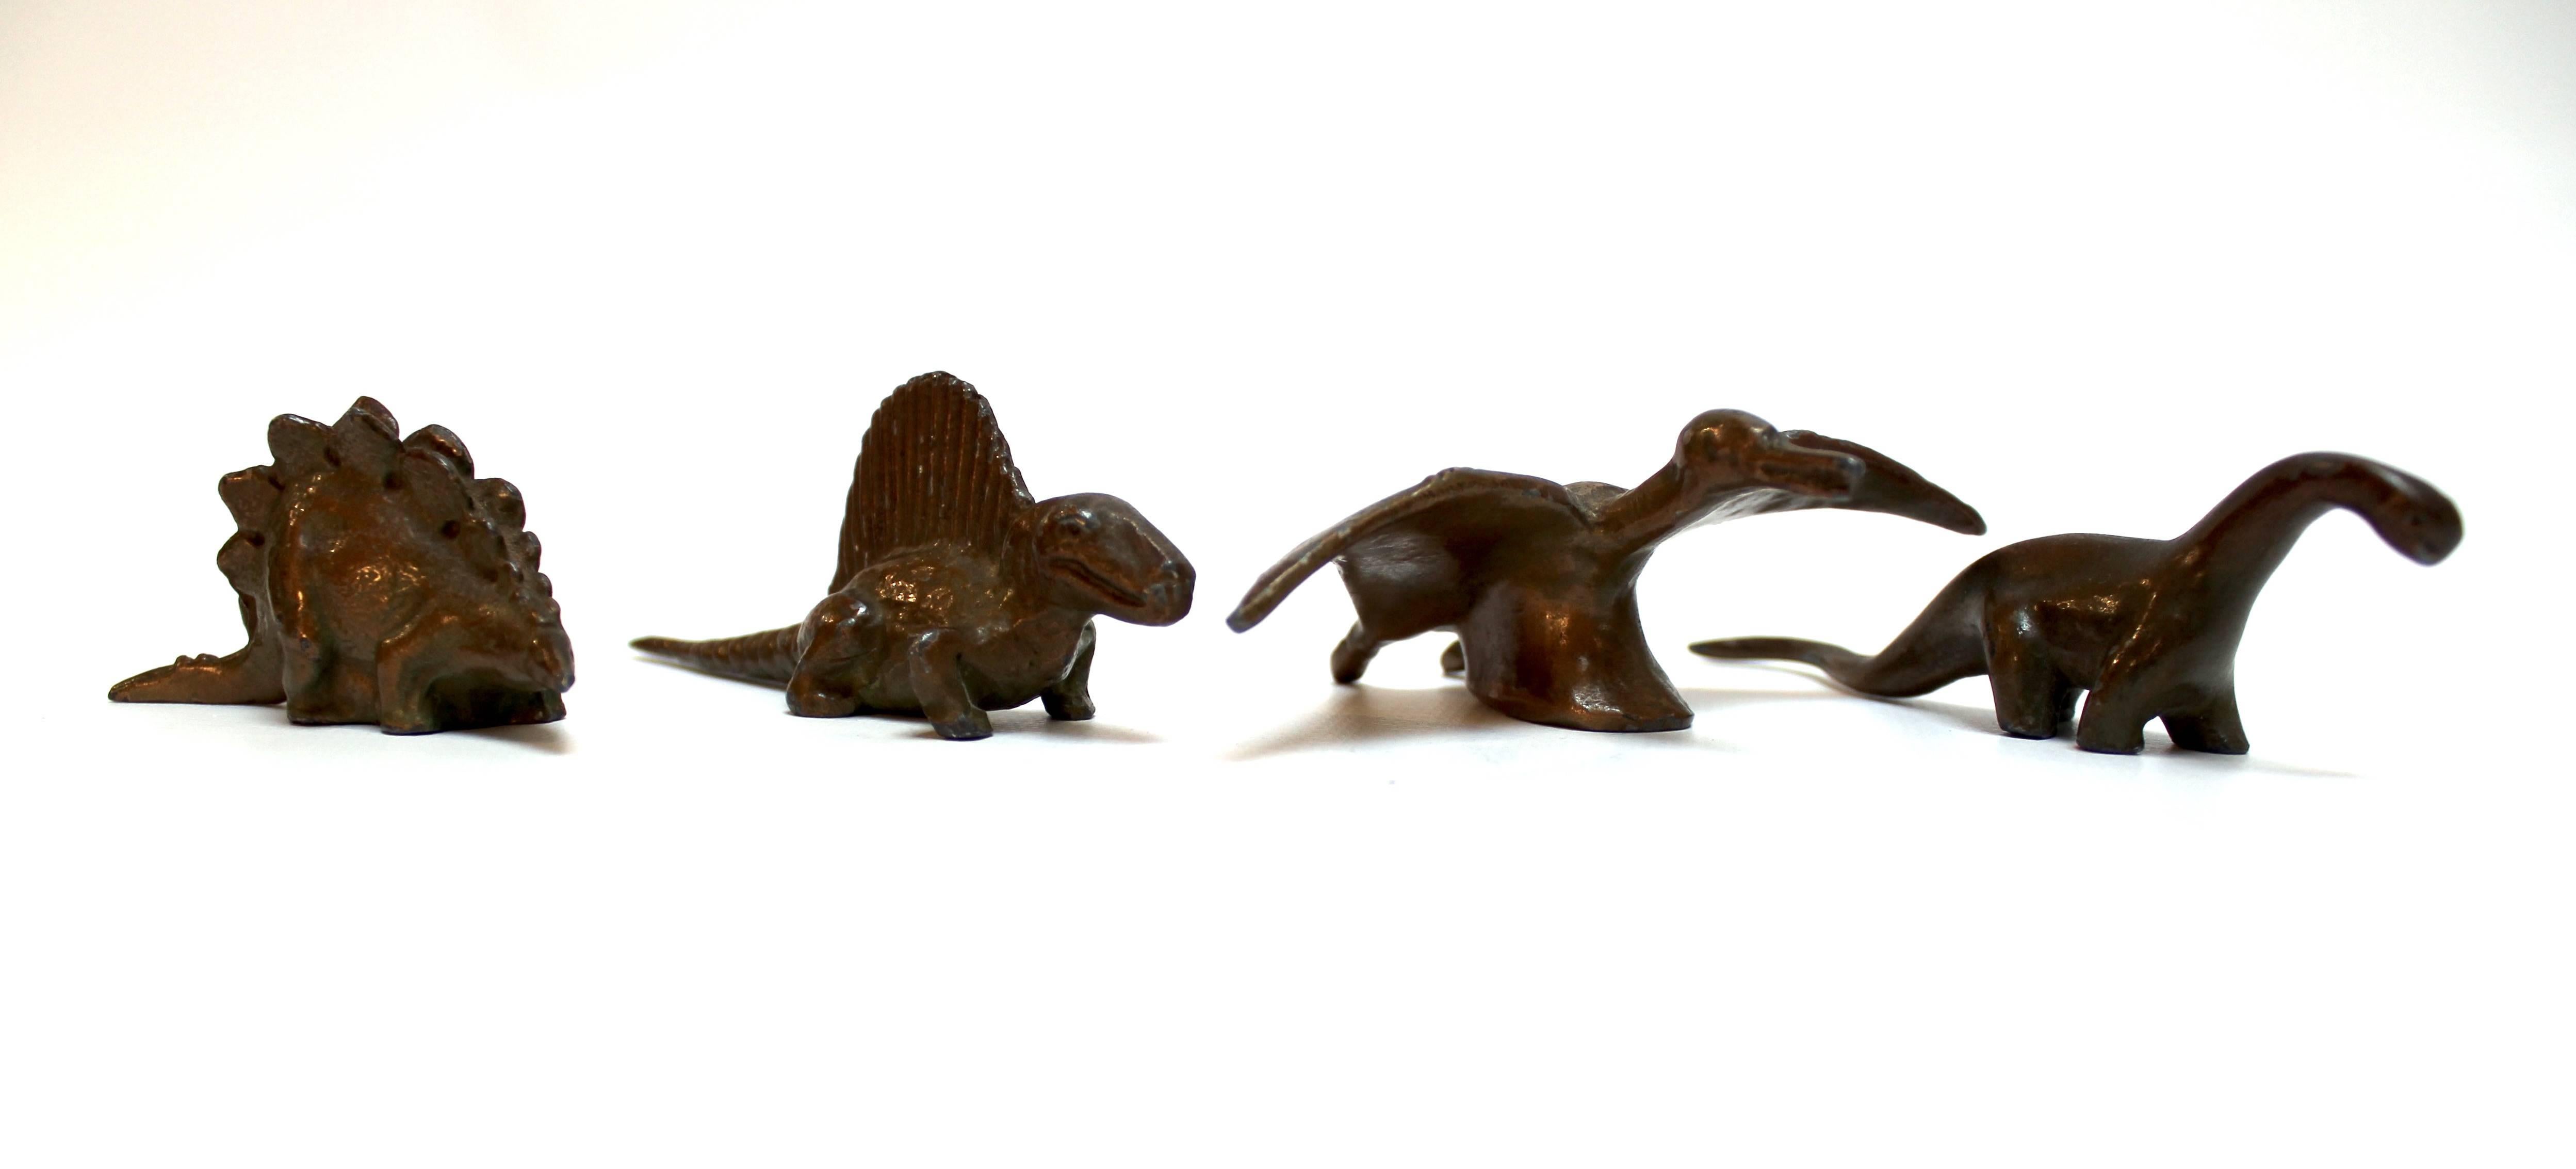 Set of 4 vintage bronze dinosaur toys manufactured by Sell-Rite Gift Company (